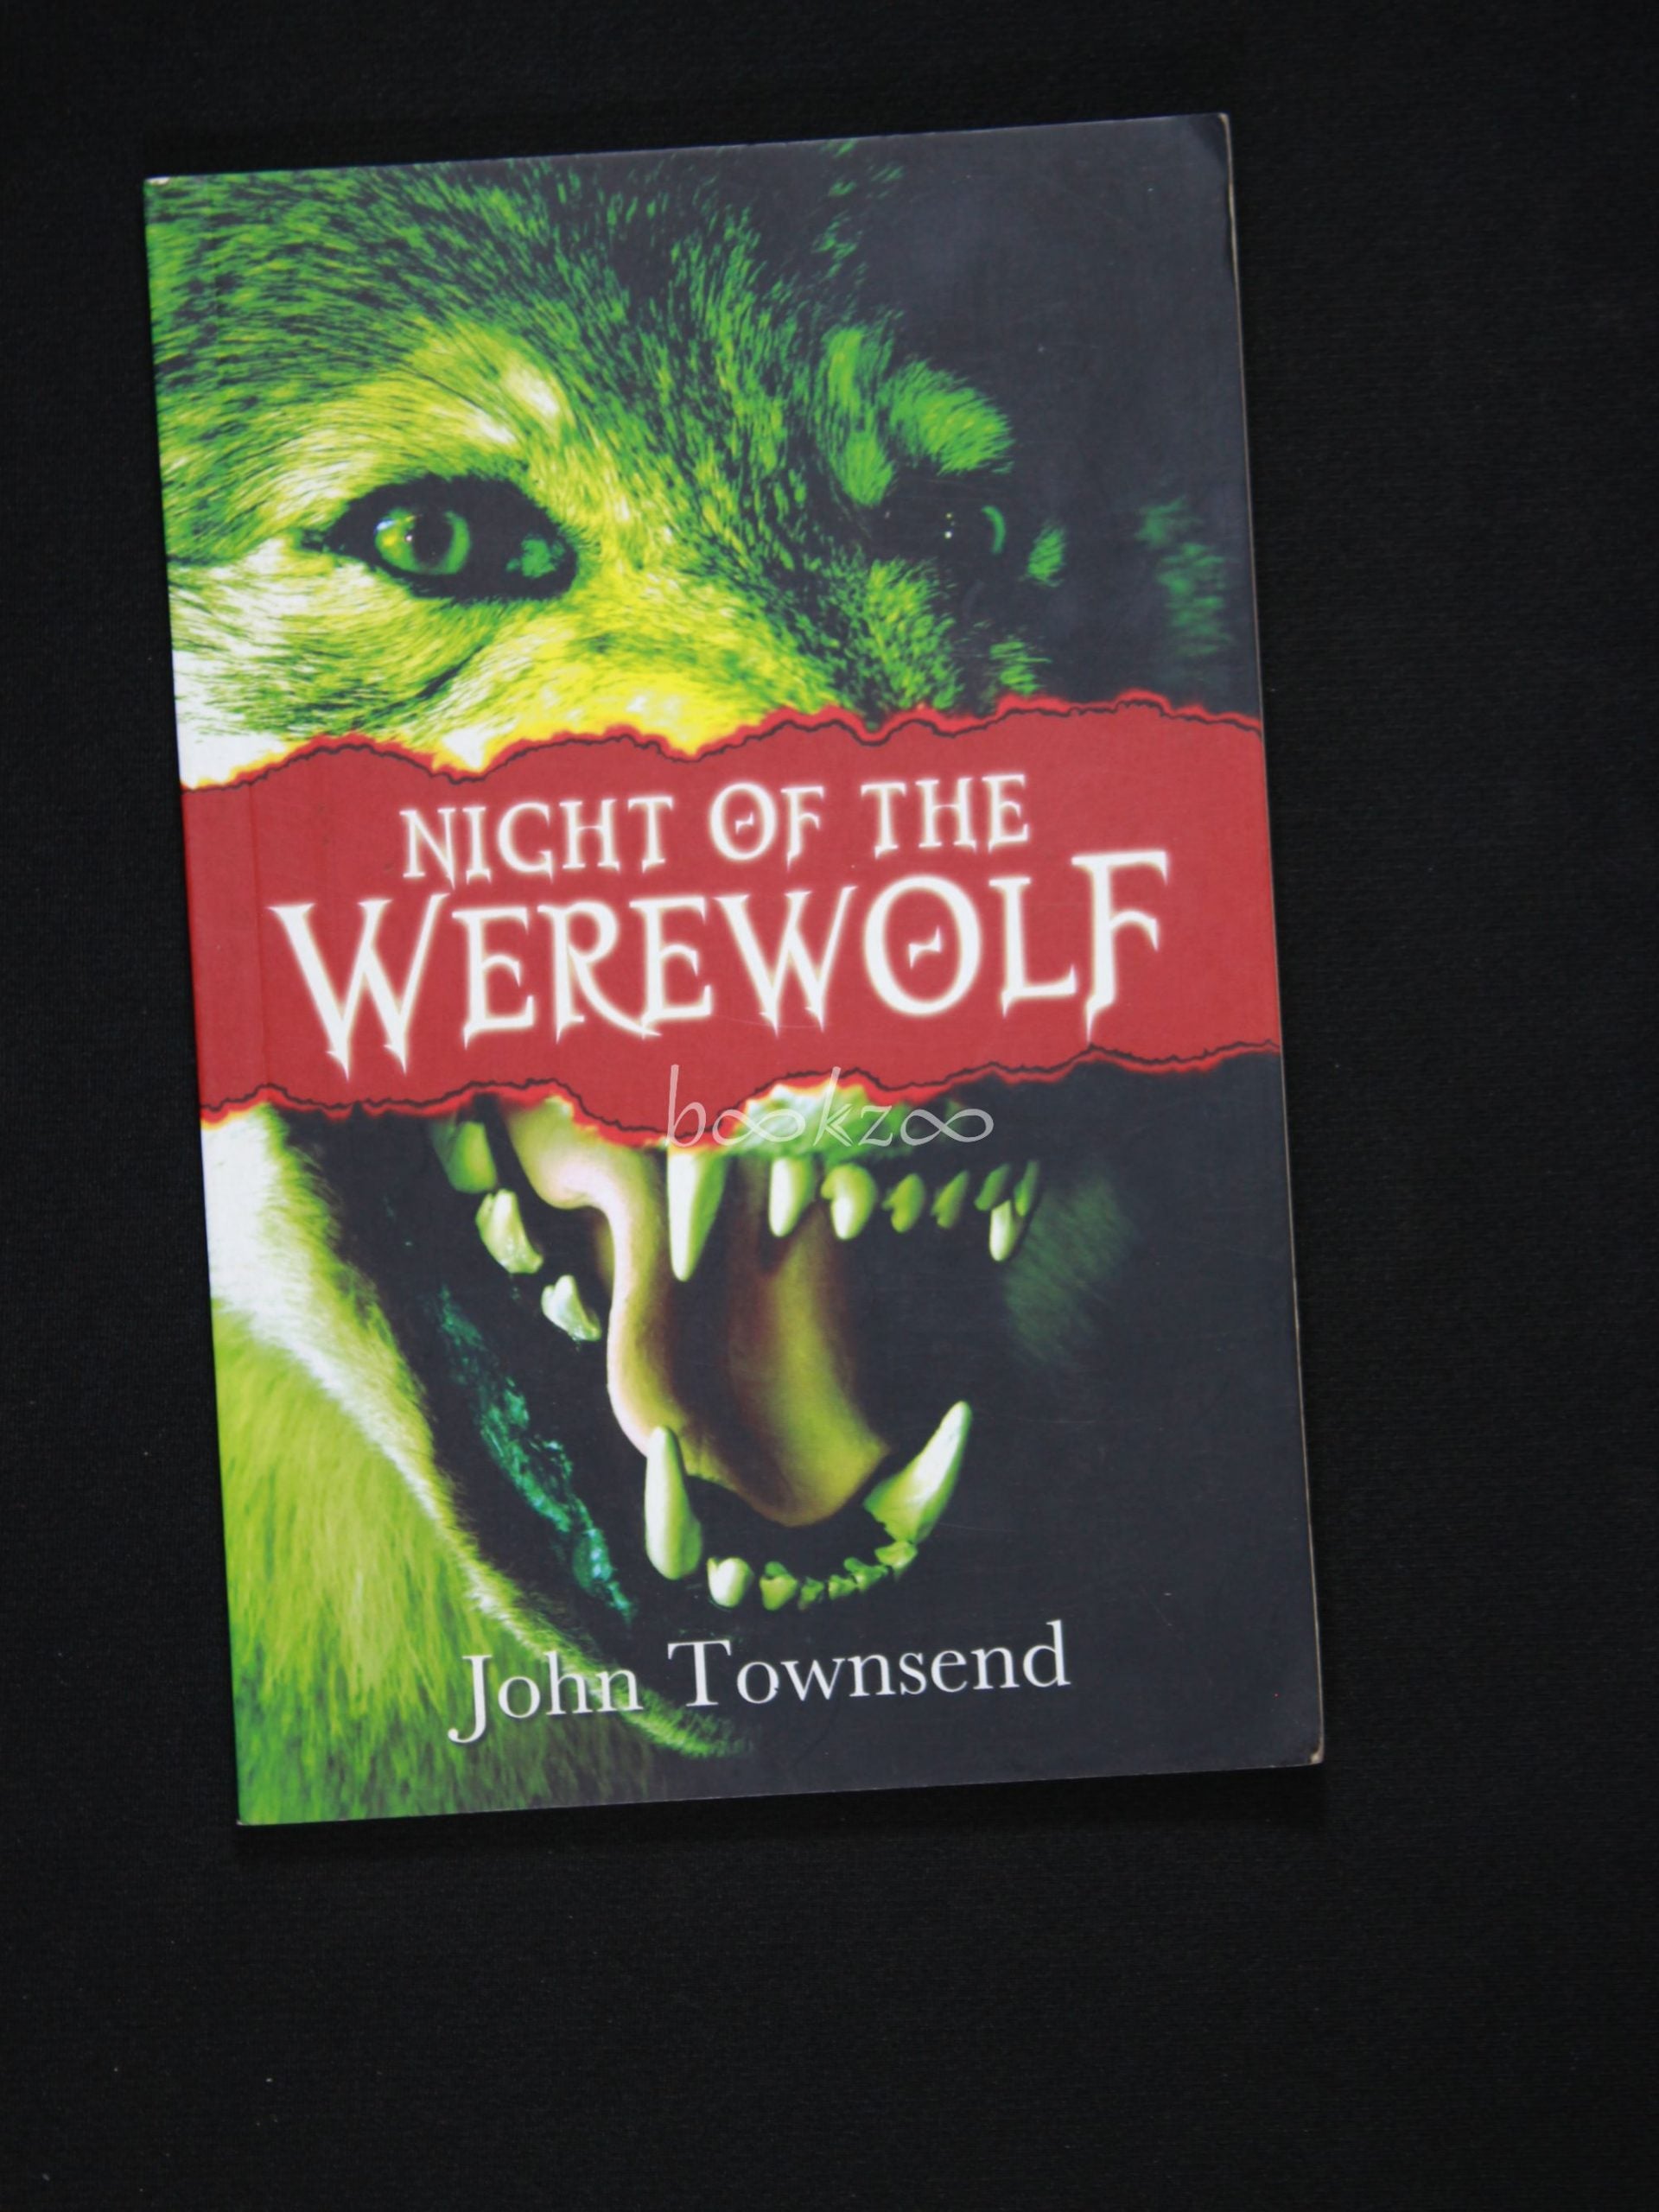 Night of the Werewolf by John Townsend (9781842997765/Paperback)